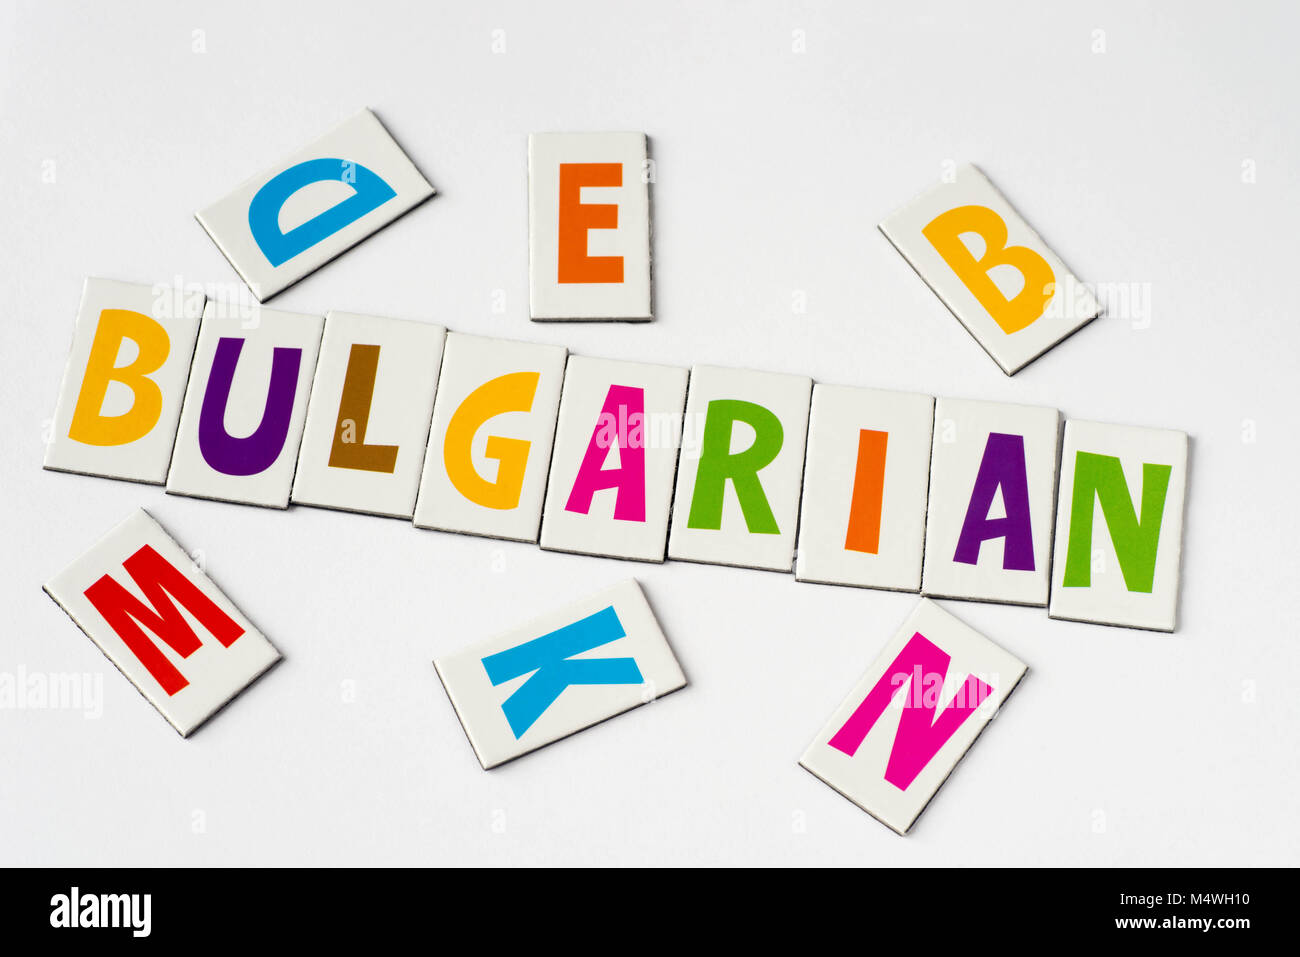 word Bulgarian made of colorful letters on white background Stock Photo